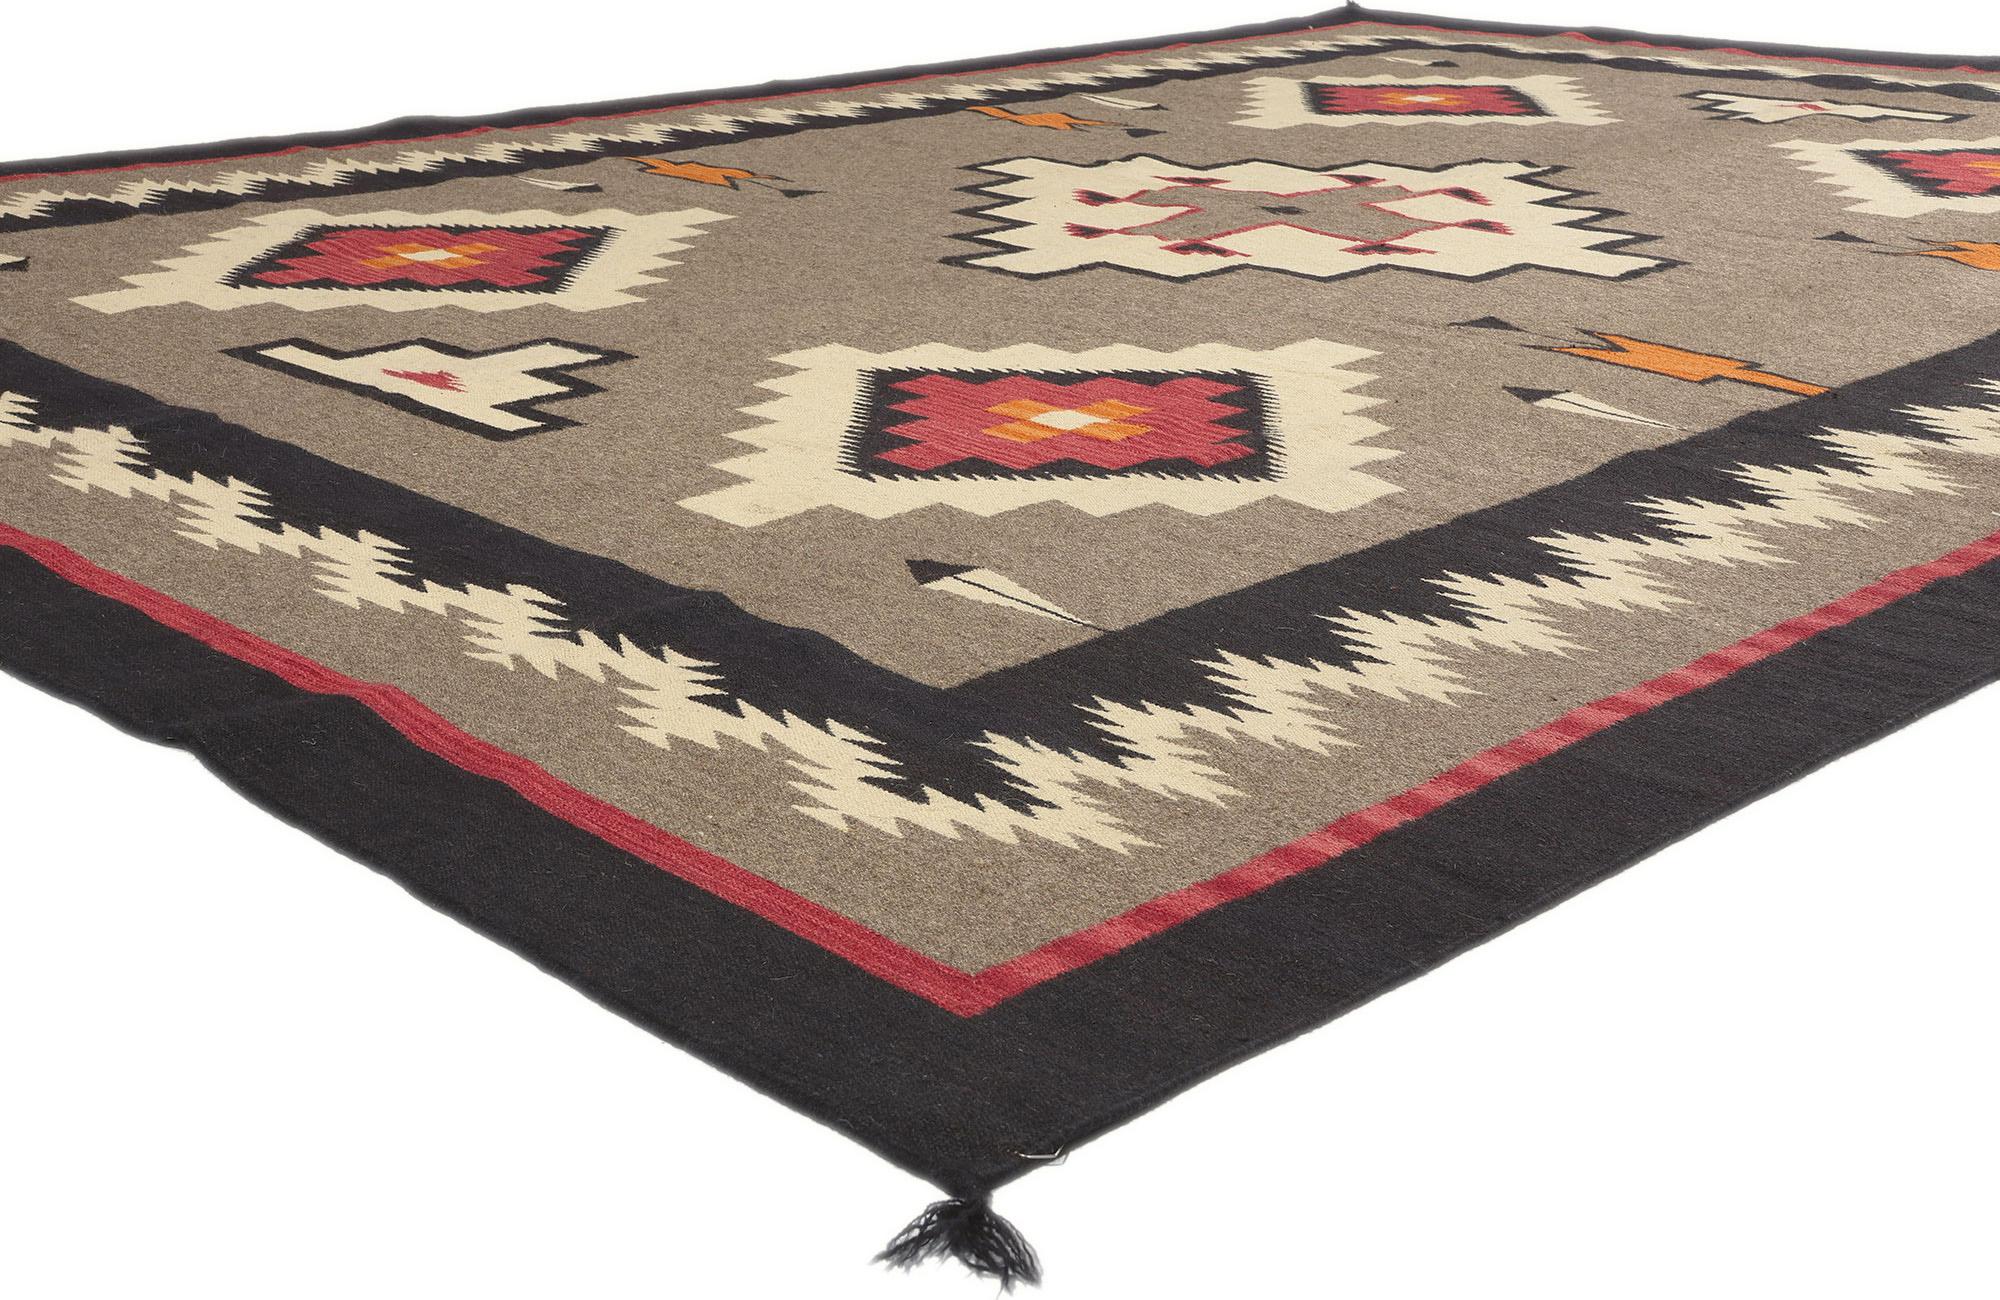 81031 Southwest Modern Teec Nos Pos Navajo-Style Rug, 08'11 x 12'01. Embark on a journey through the harmonious blend of Modern style and Southwest aesthetics with this meticulously handwoven Teec Nos Pos Navajo-style rug. Teec Nos Pos, celebrated